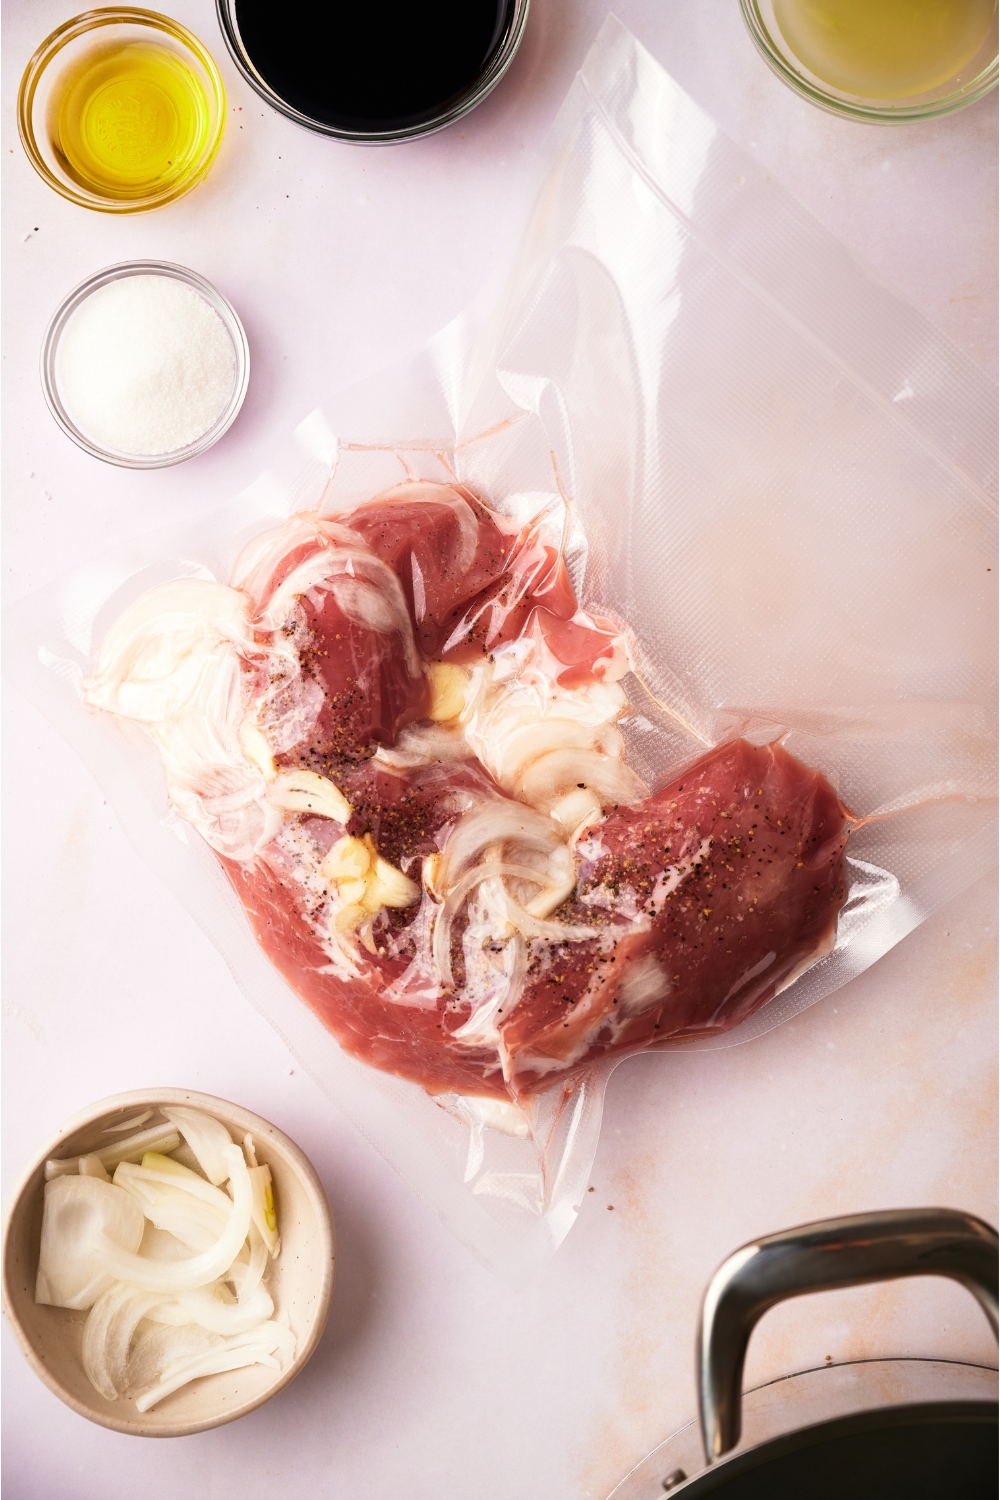 Pork tenderloin vacuum sealed with garlic and onion, surrounded by an assortment of ingredients.